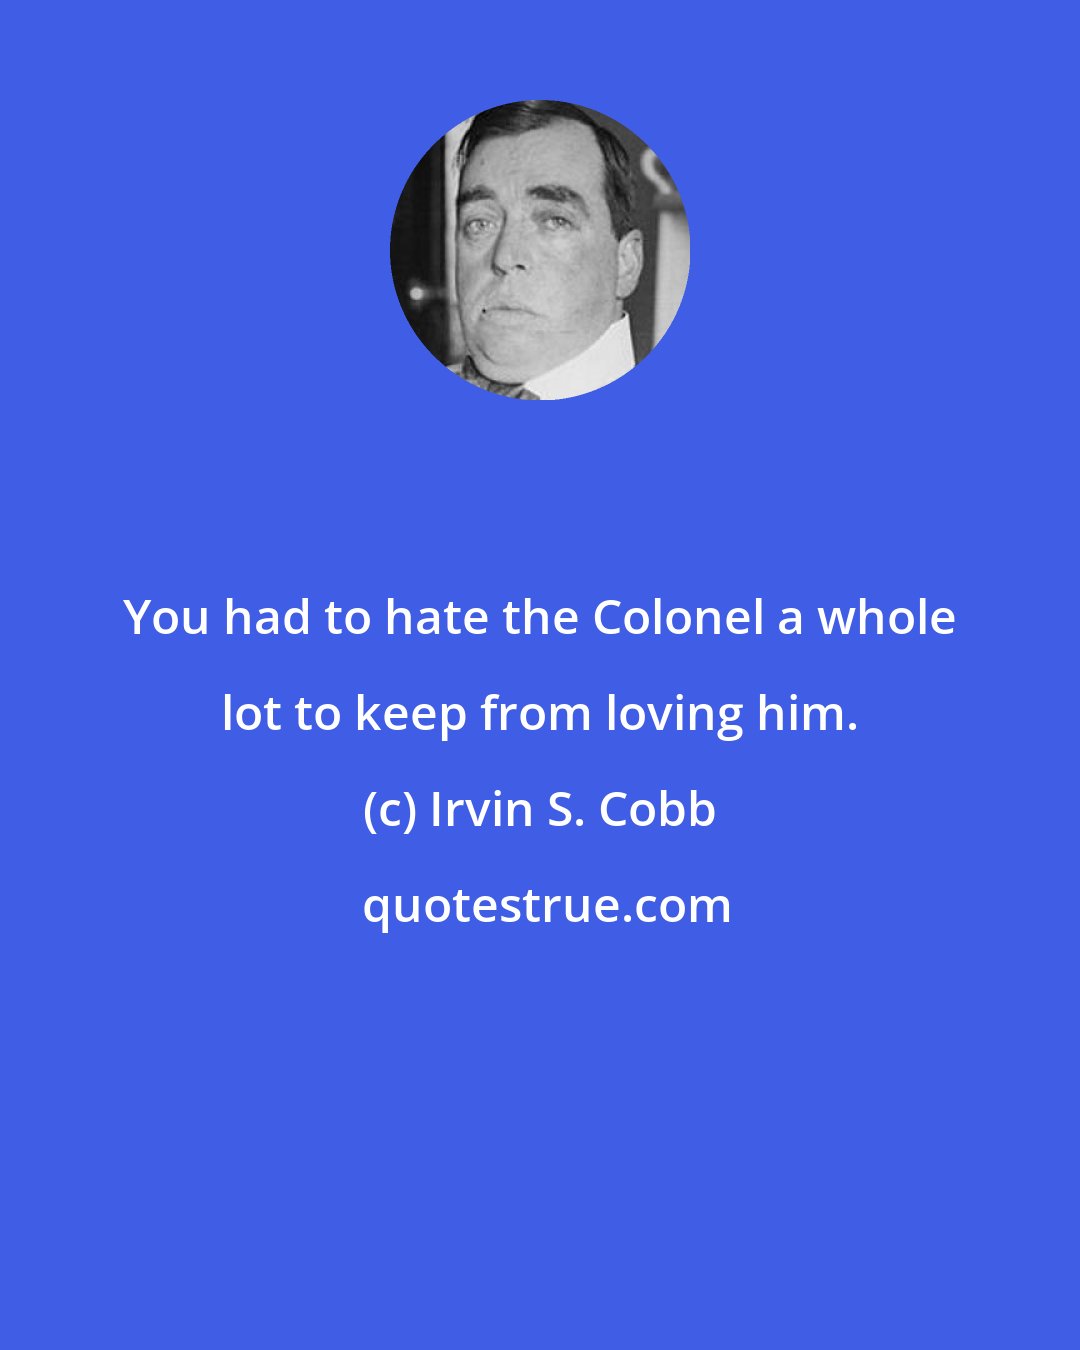 Irvin S. Cobb: You had to hate the Colonel a whole lot to keep from loving him.